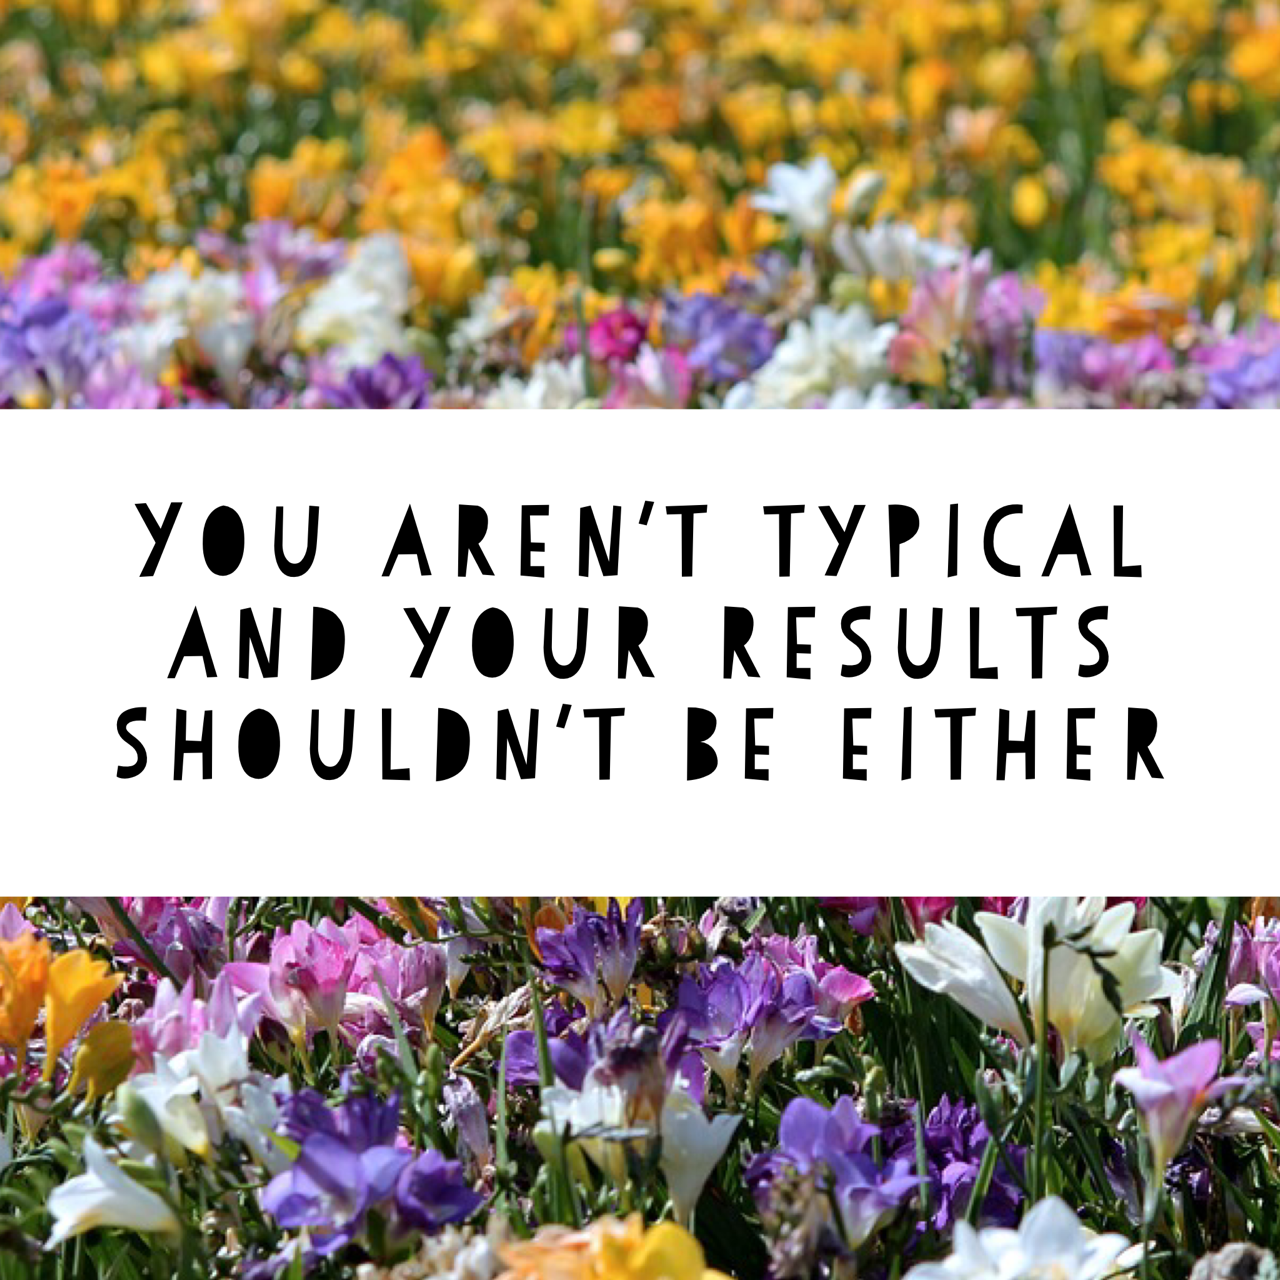 You aren’t typical and your results shouldn’t be either